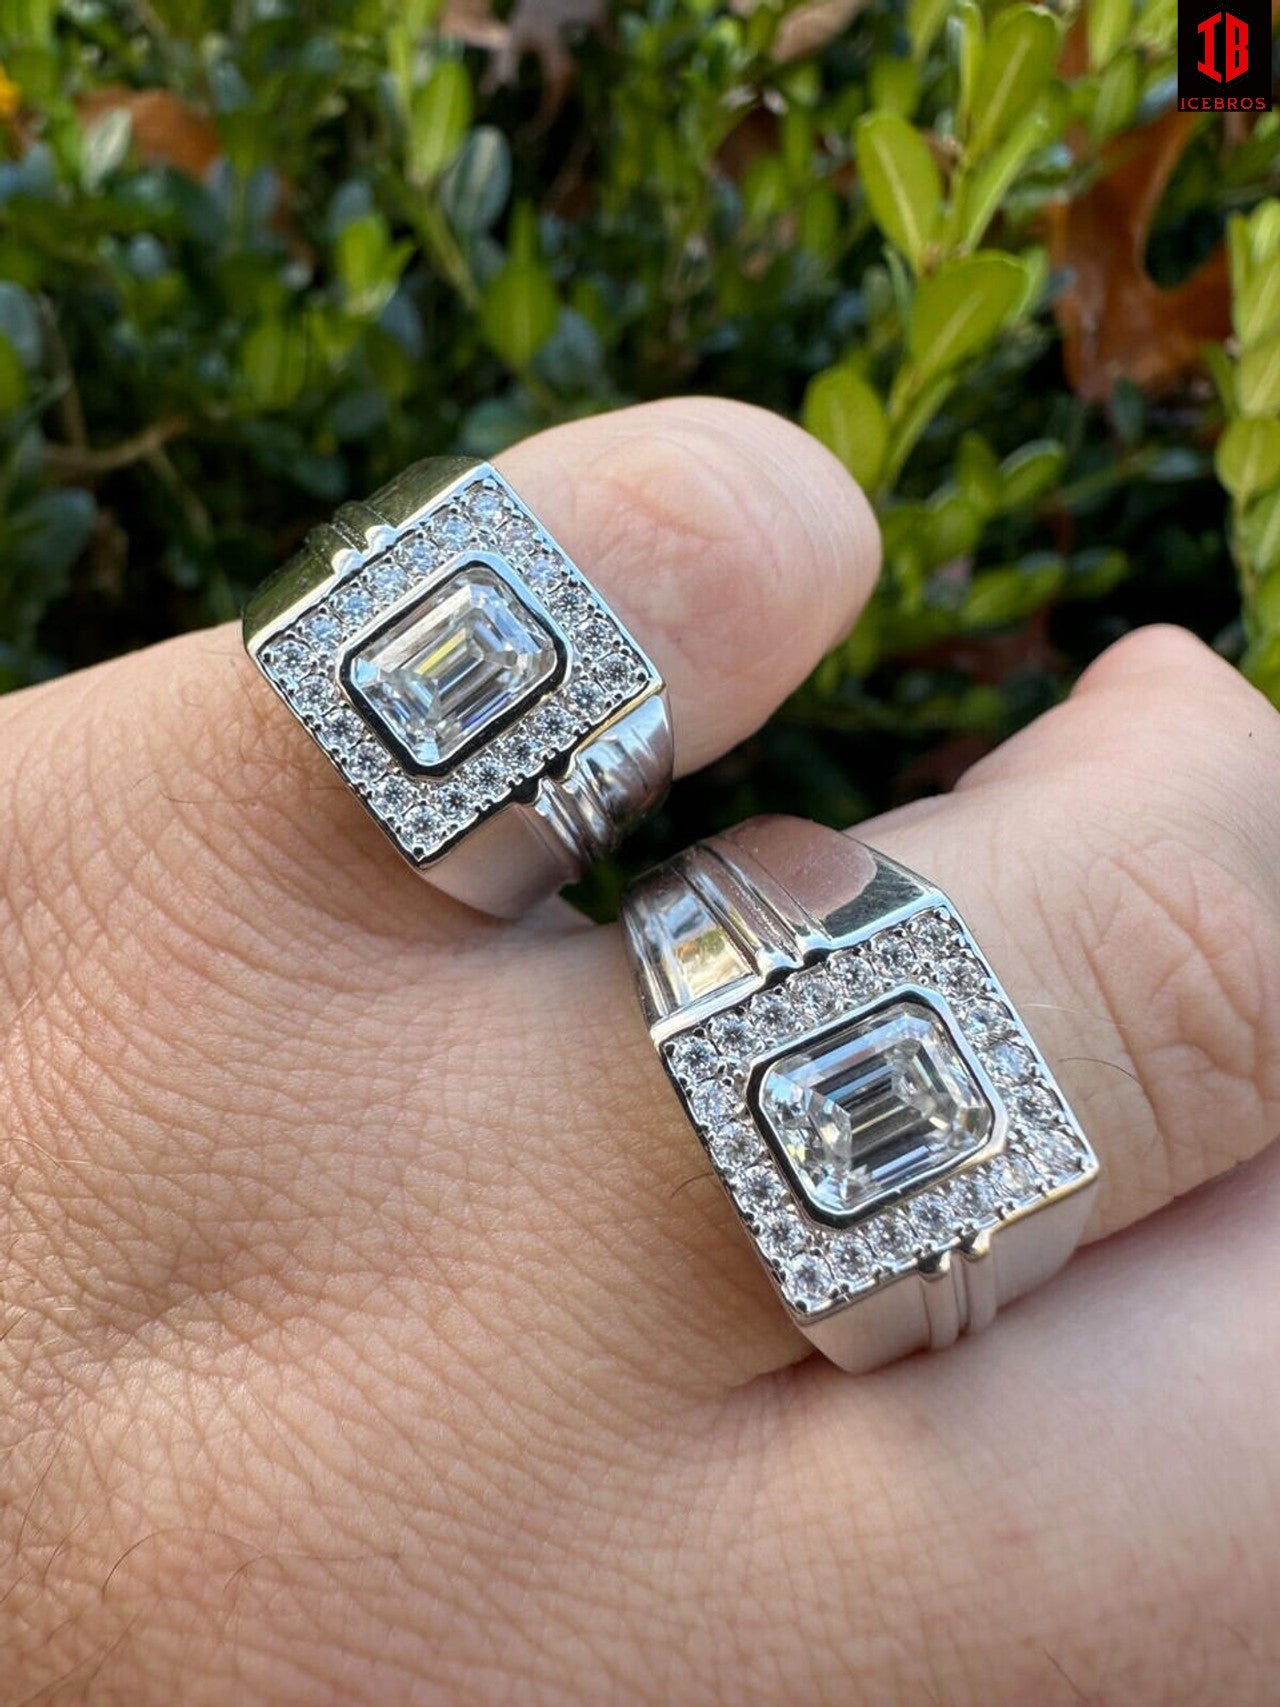 A Zoomed In View of 14k White Gold Emerald Cut Moissanie Pinky Rings On Men's Hand